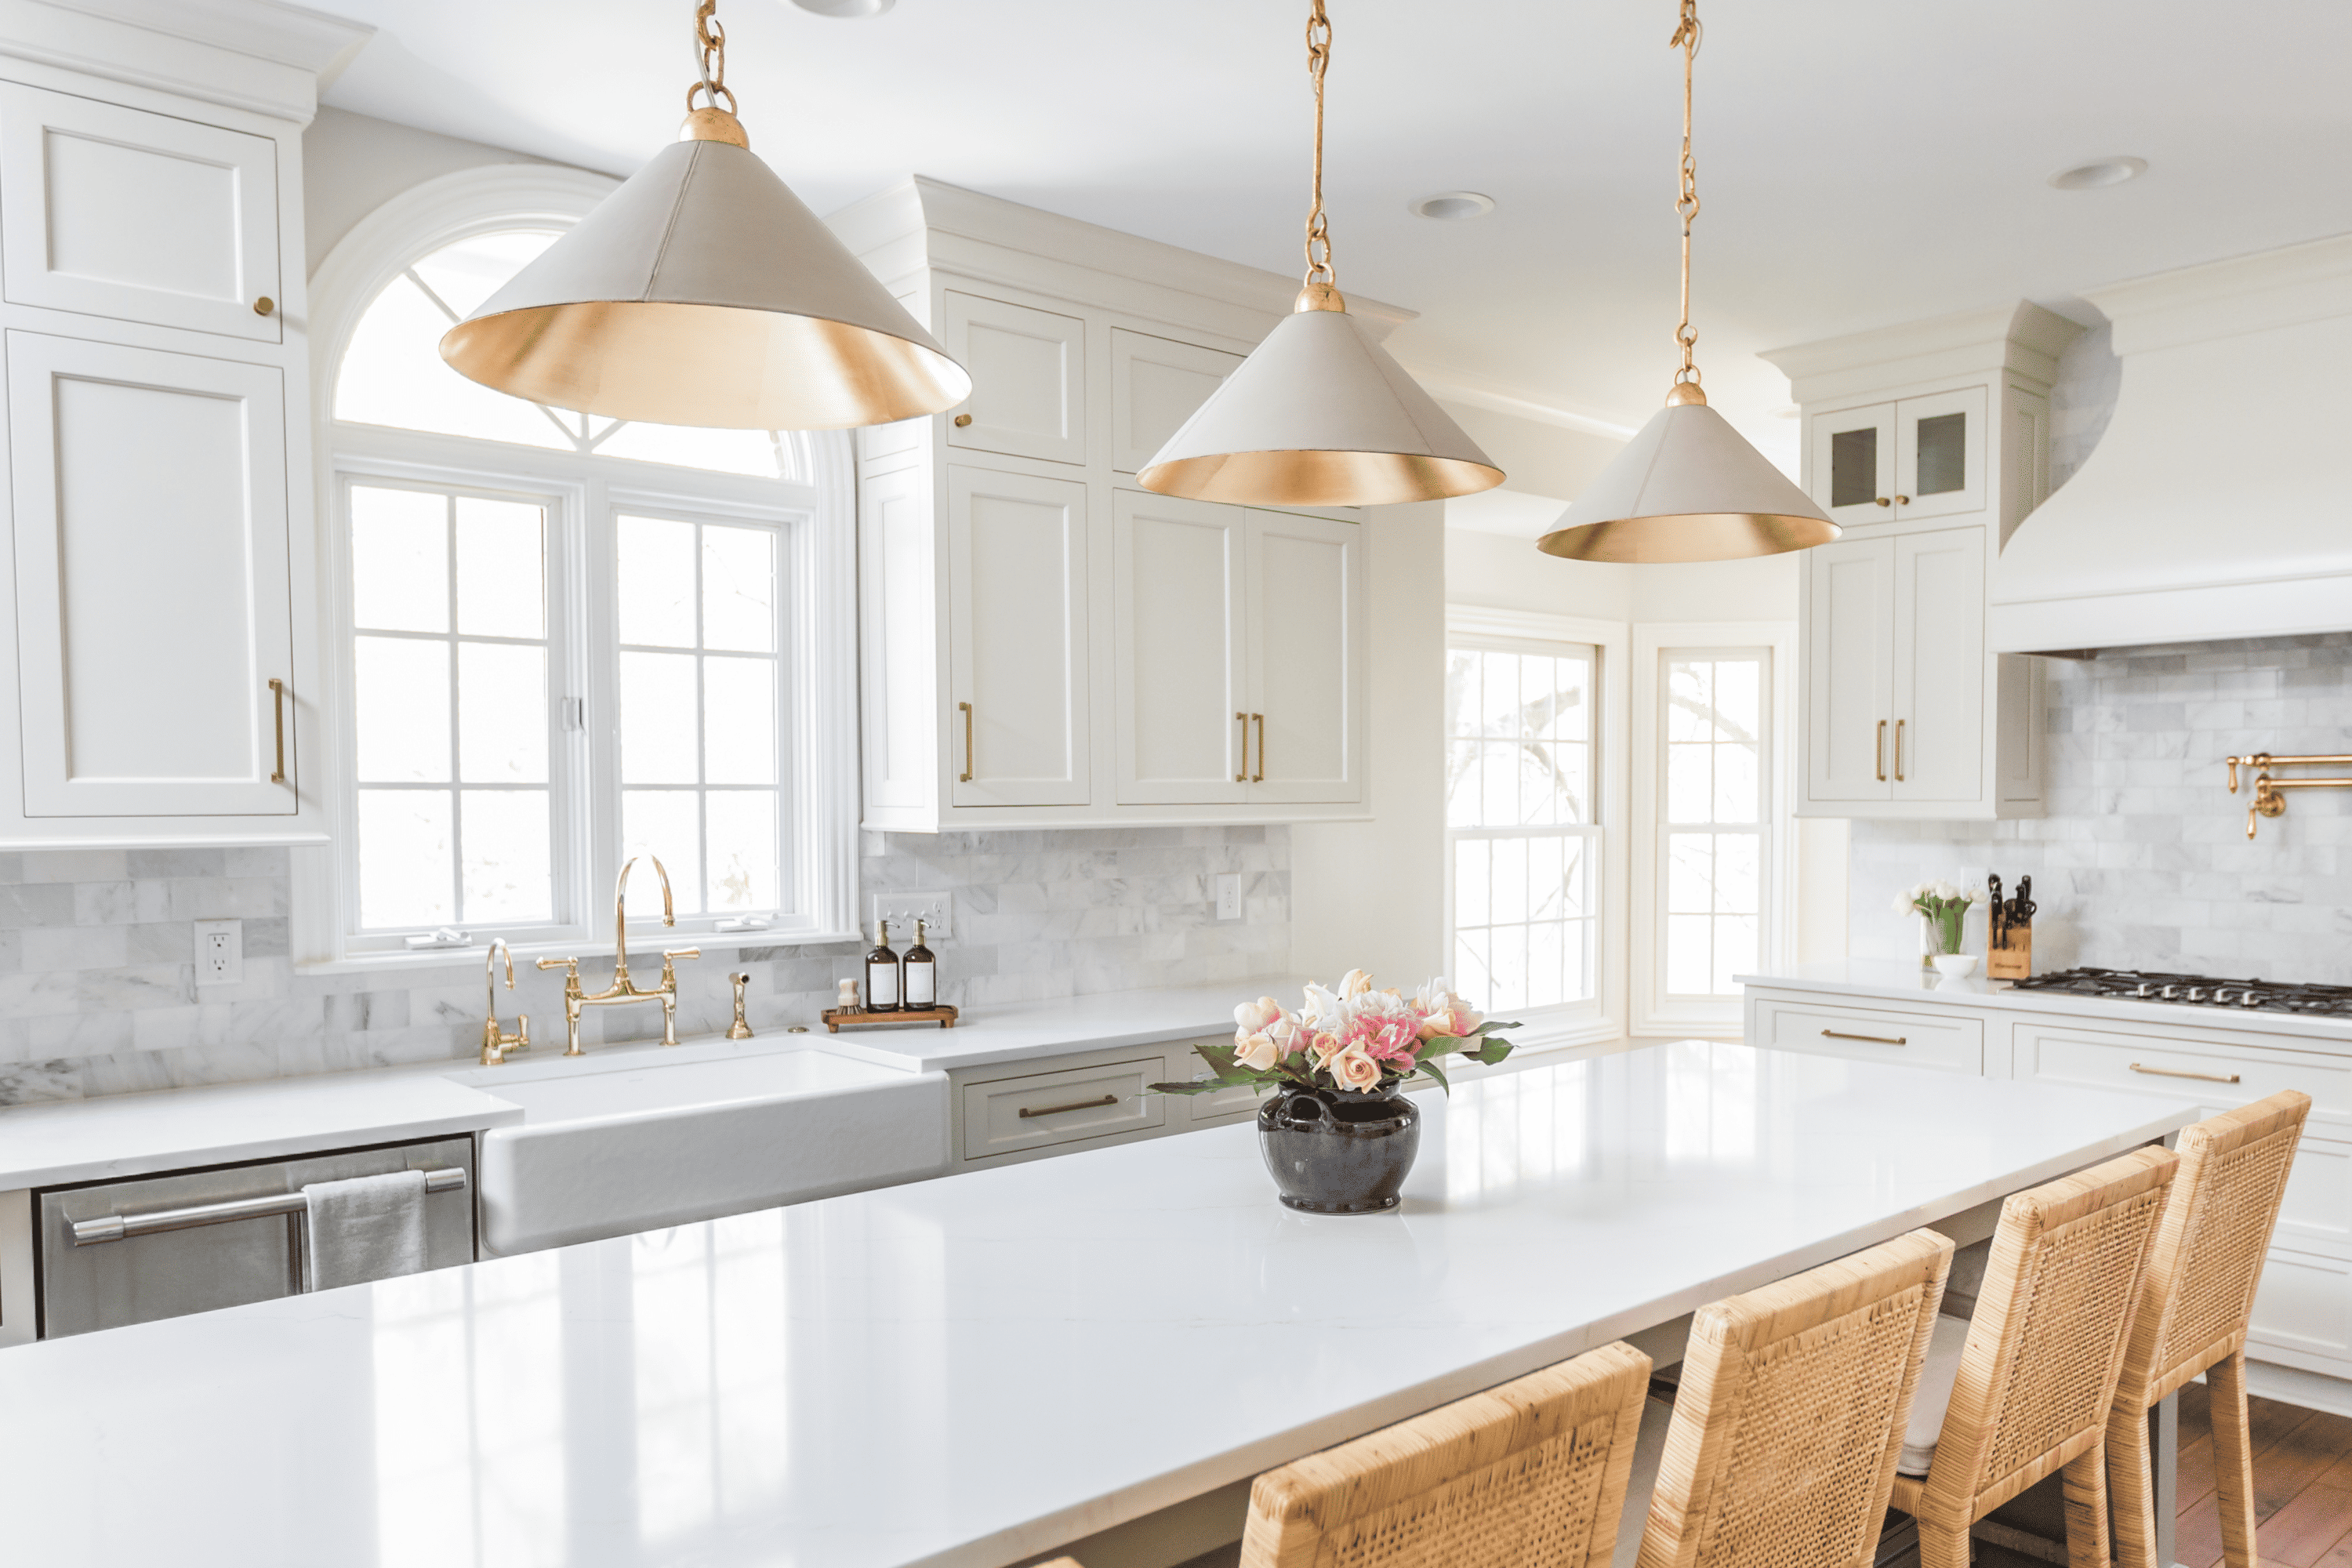 Nicholas Design Build | A kitchen with remodelled white cabinets and gold pendant lights.